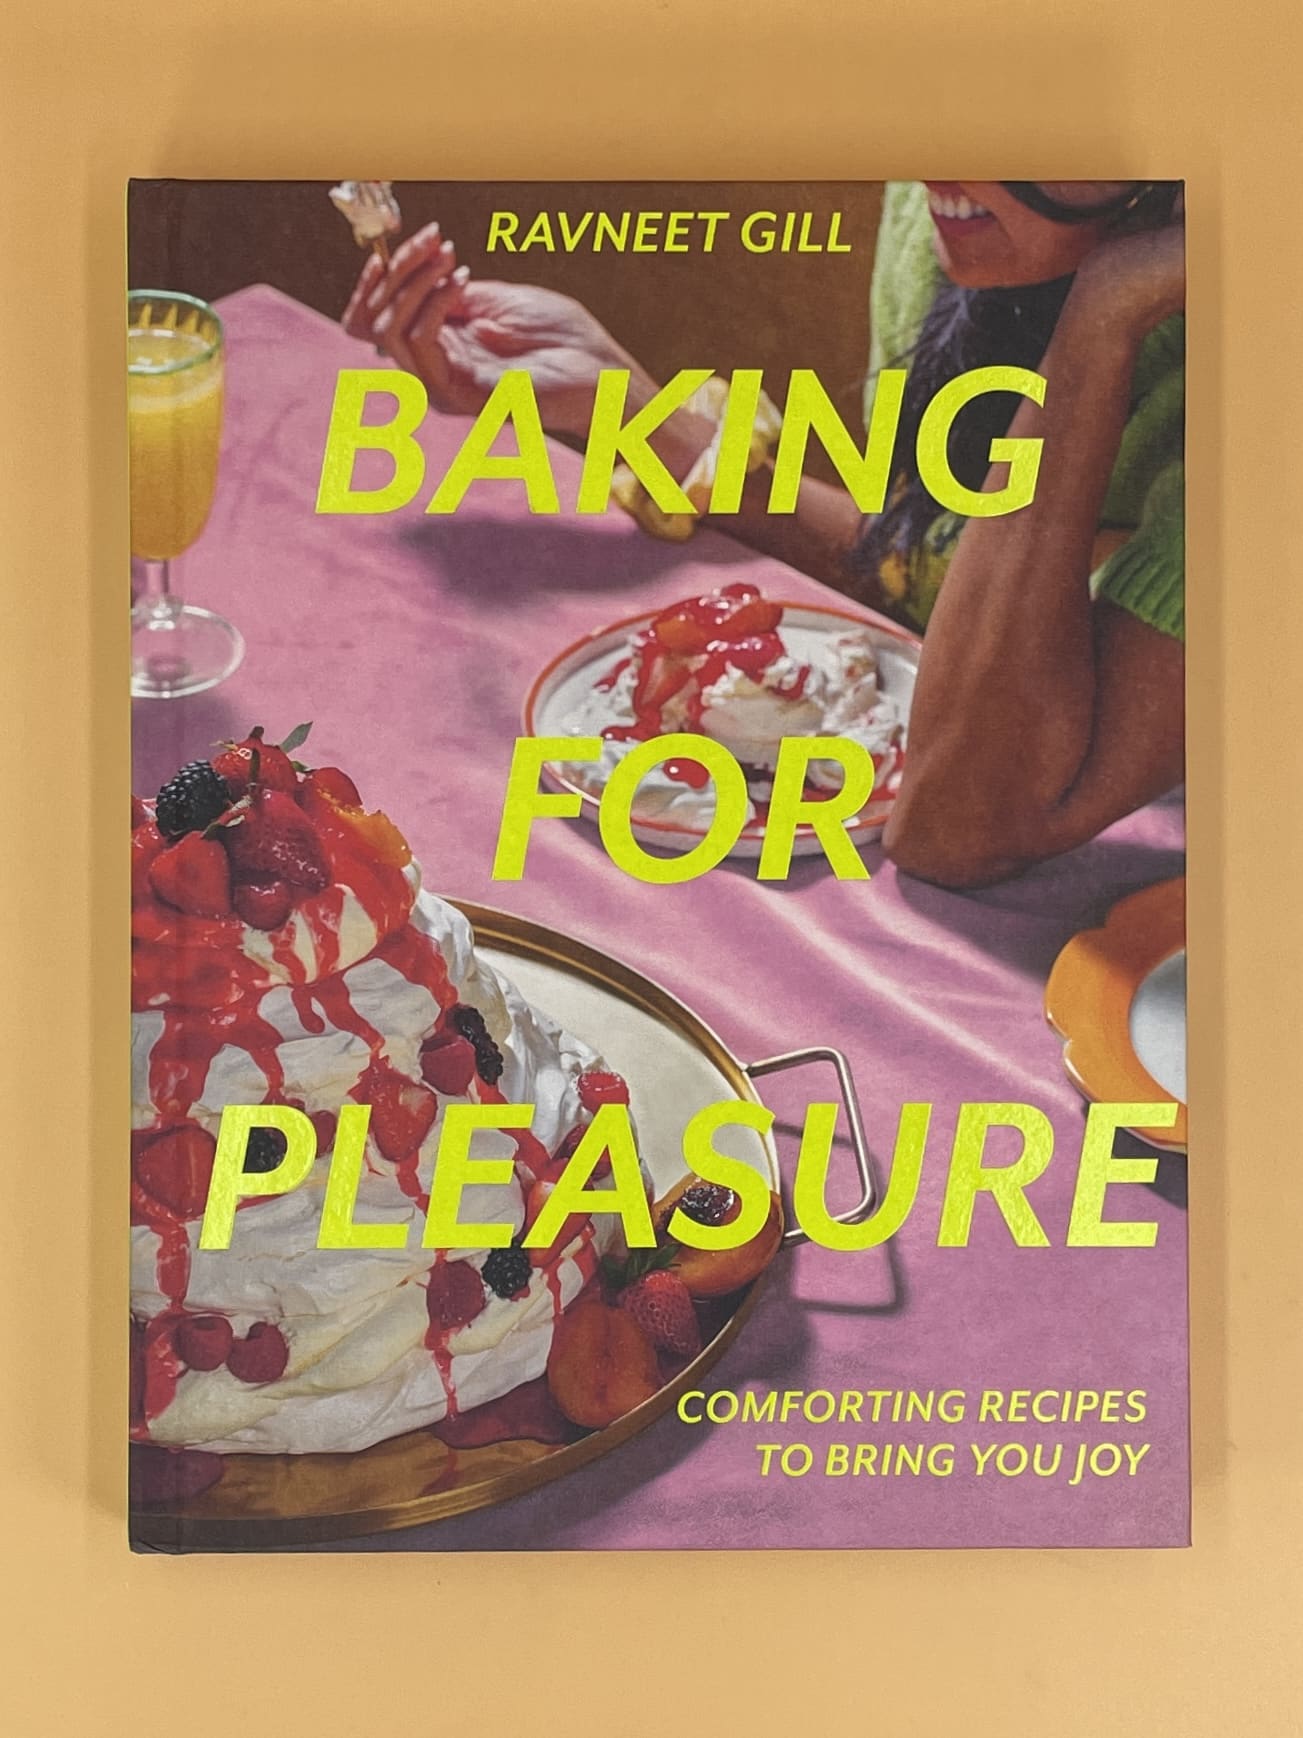 Baking for Pleasure: Comforting Recipes to Bring You Joy (Ravneet Gill)